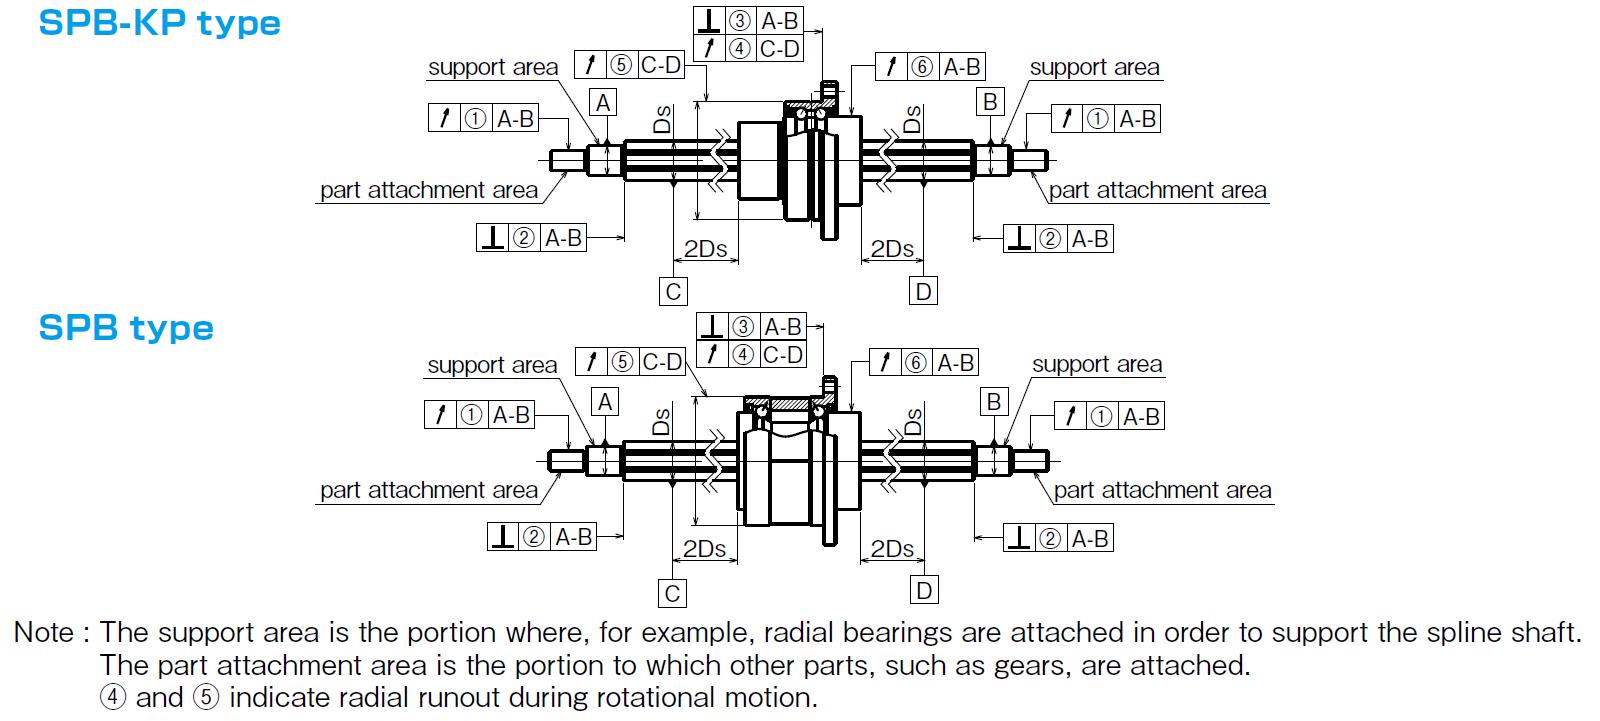 Accuracy Measurement Points for SPB and SPB-KP type